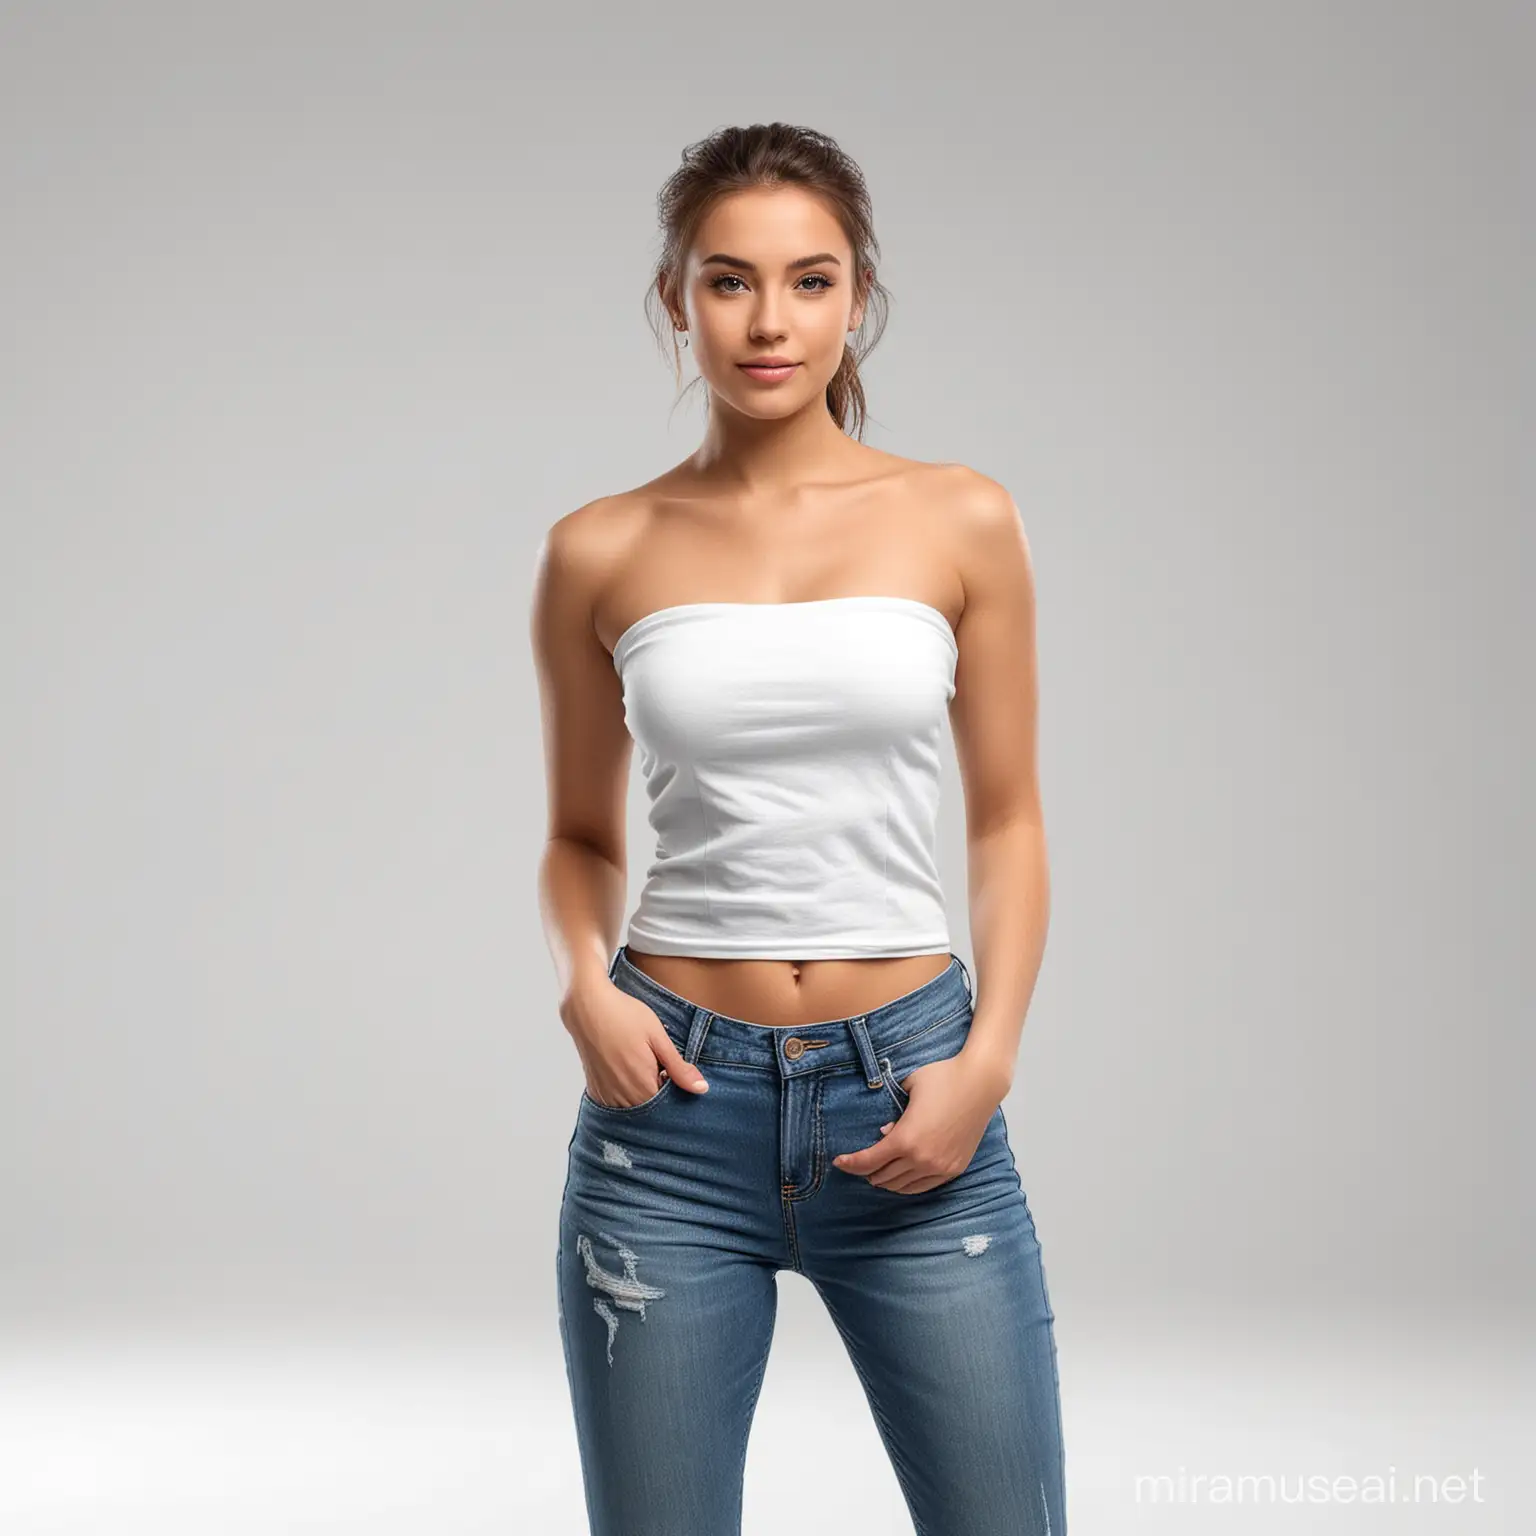 Attractive Young Woman in Casual Attire Standing in Photo Studio